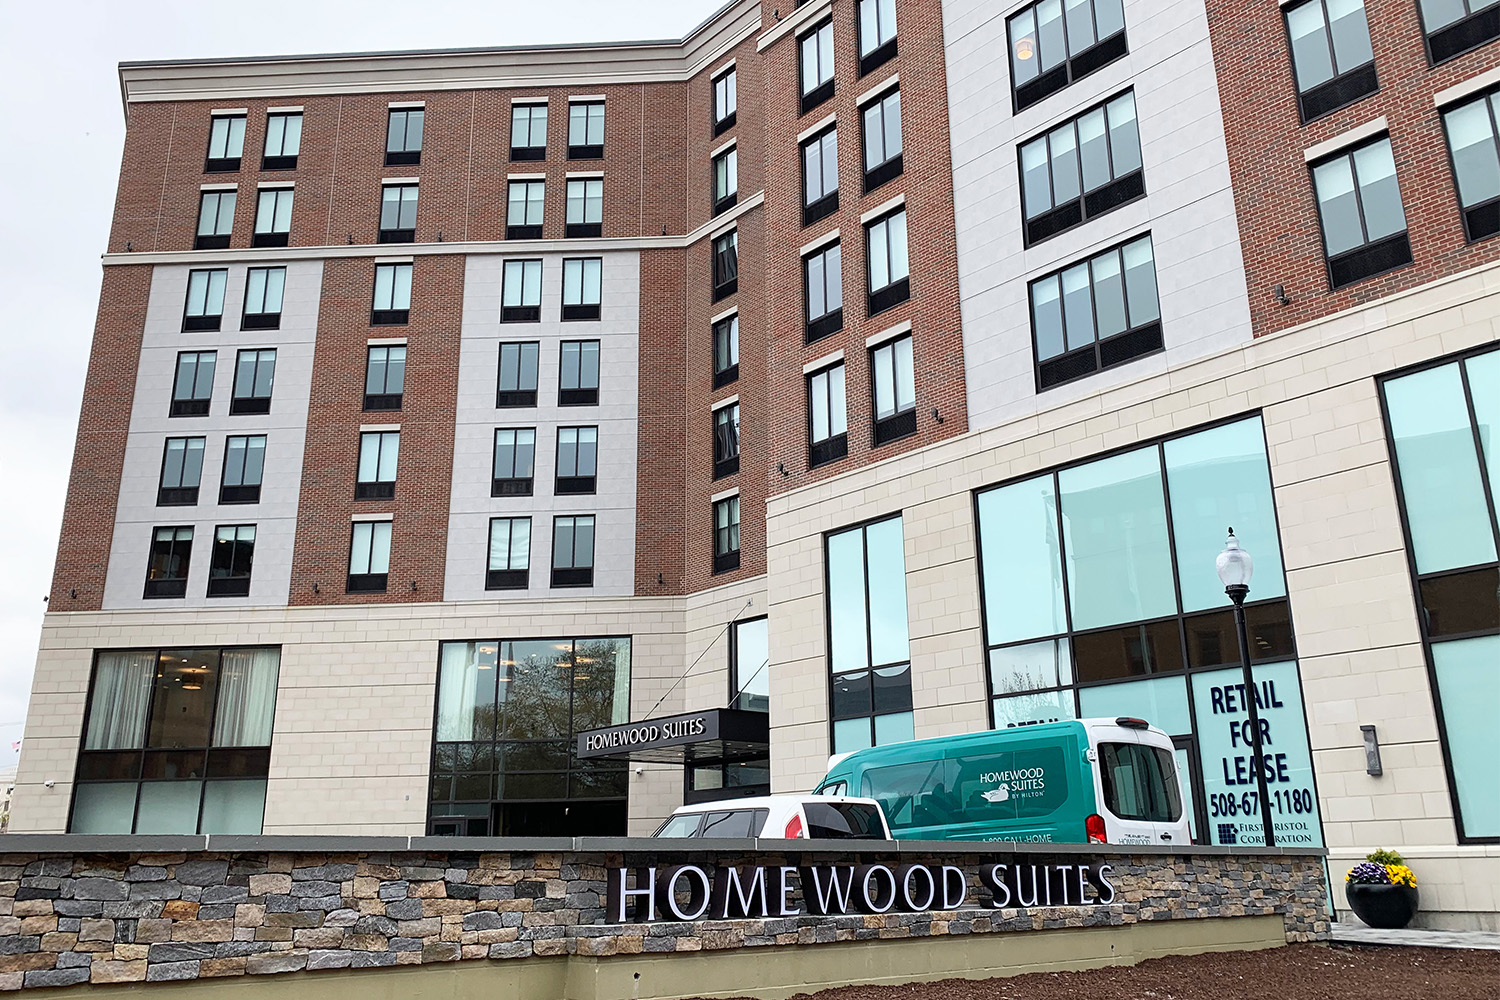 Homewood Suites sign outside of building 